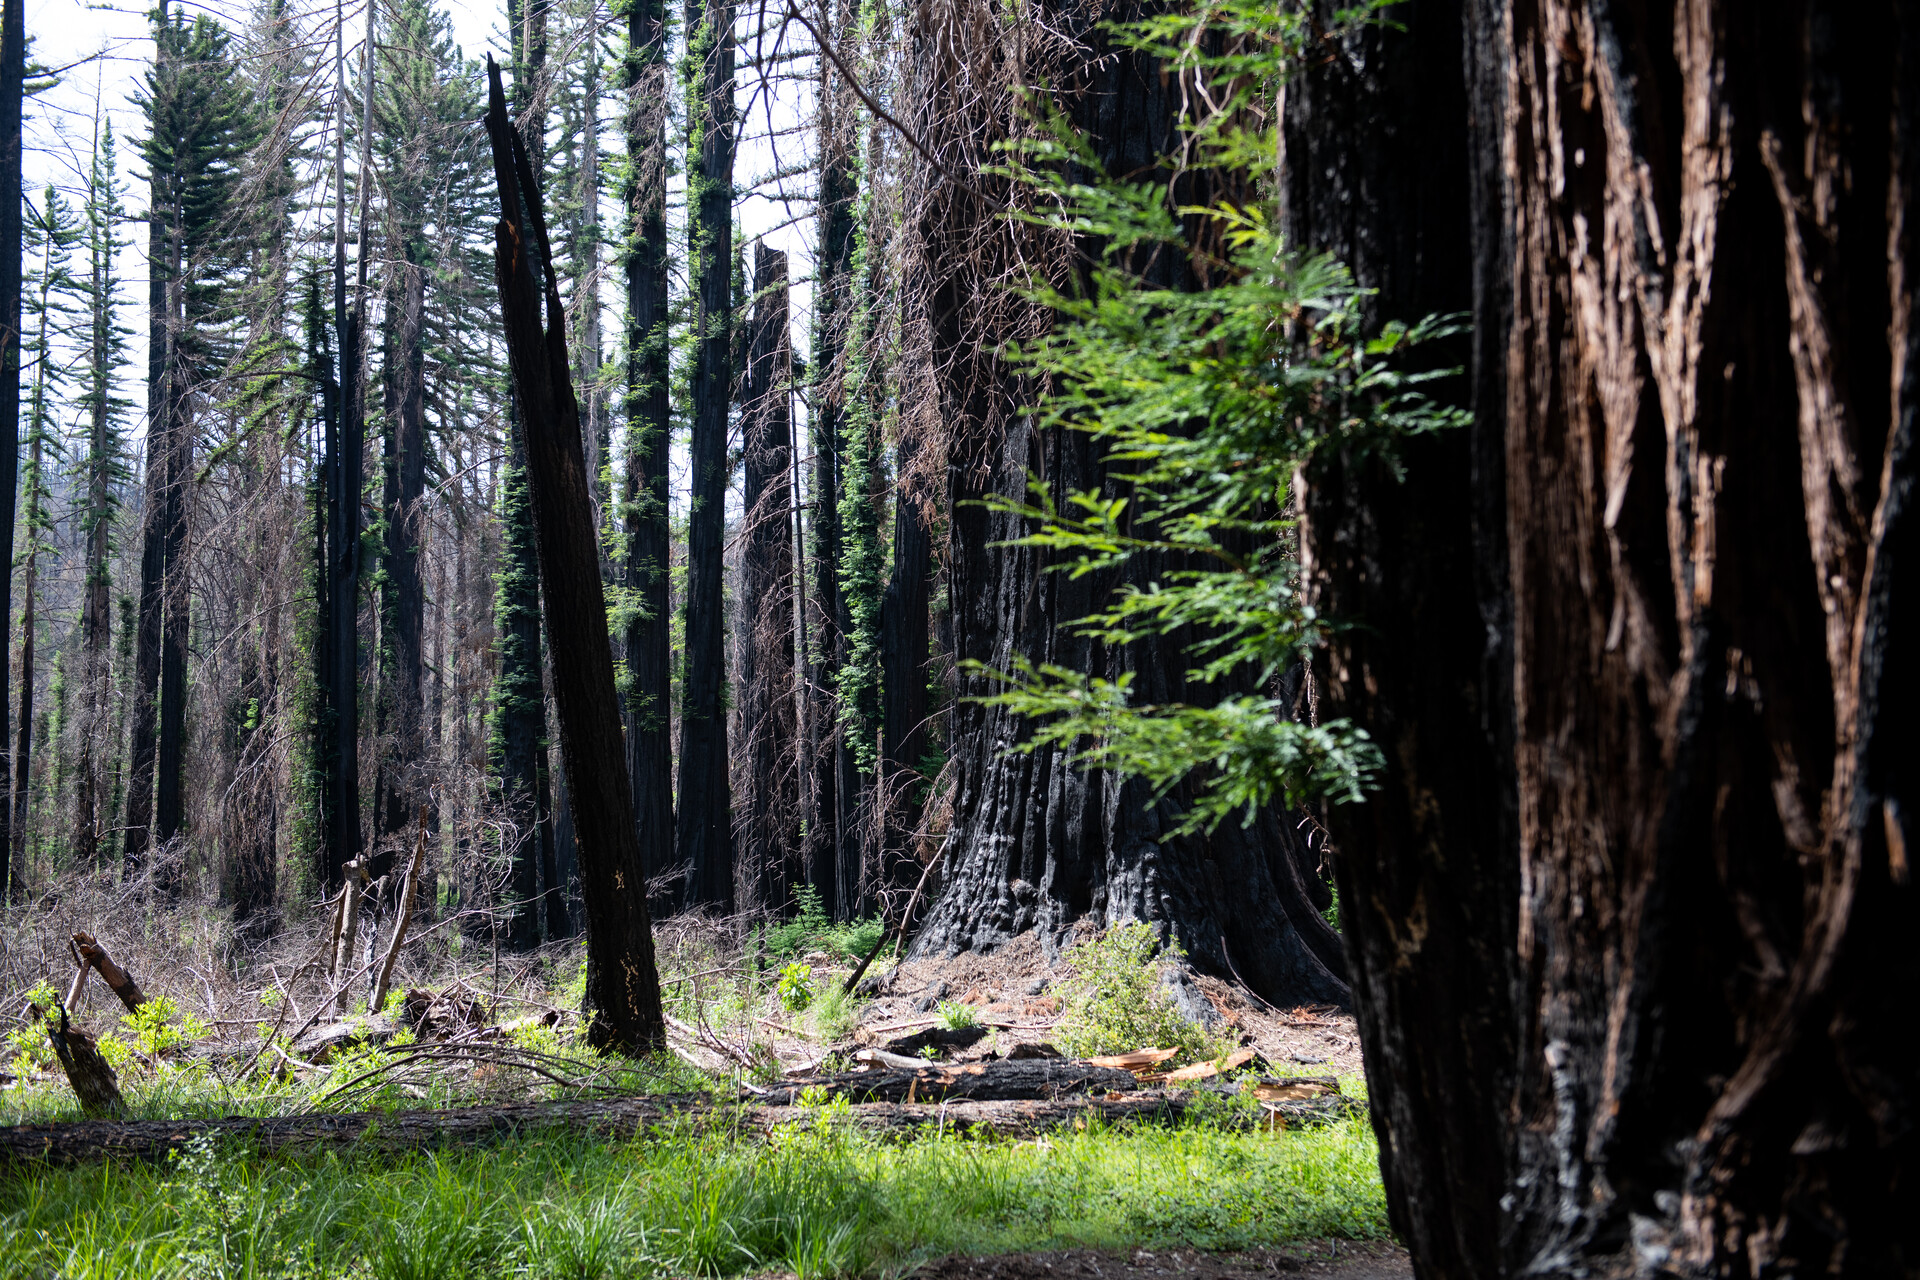 Fire-scarred redwoods at Big Basin, with bright green foliage growing on the branchless black trunks. One trunk in the foreground has no foliage, and is leaning at an angle. Bright green grass grows below.